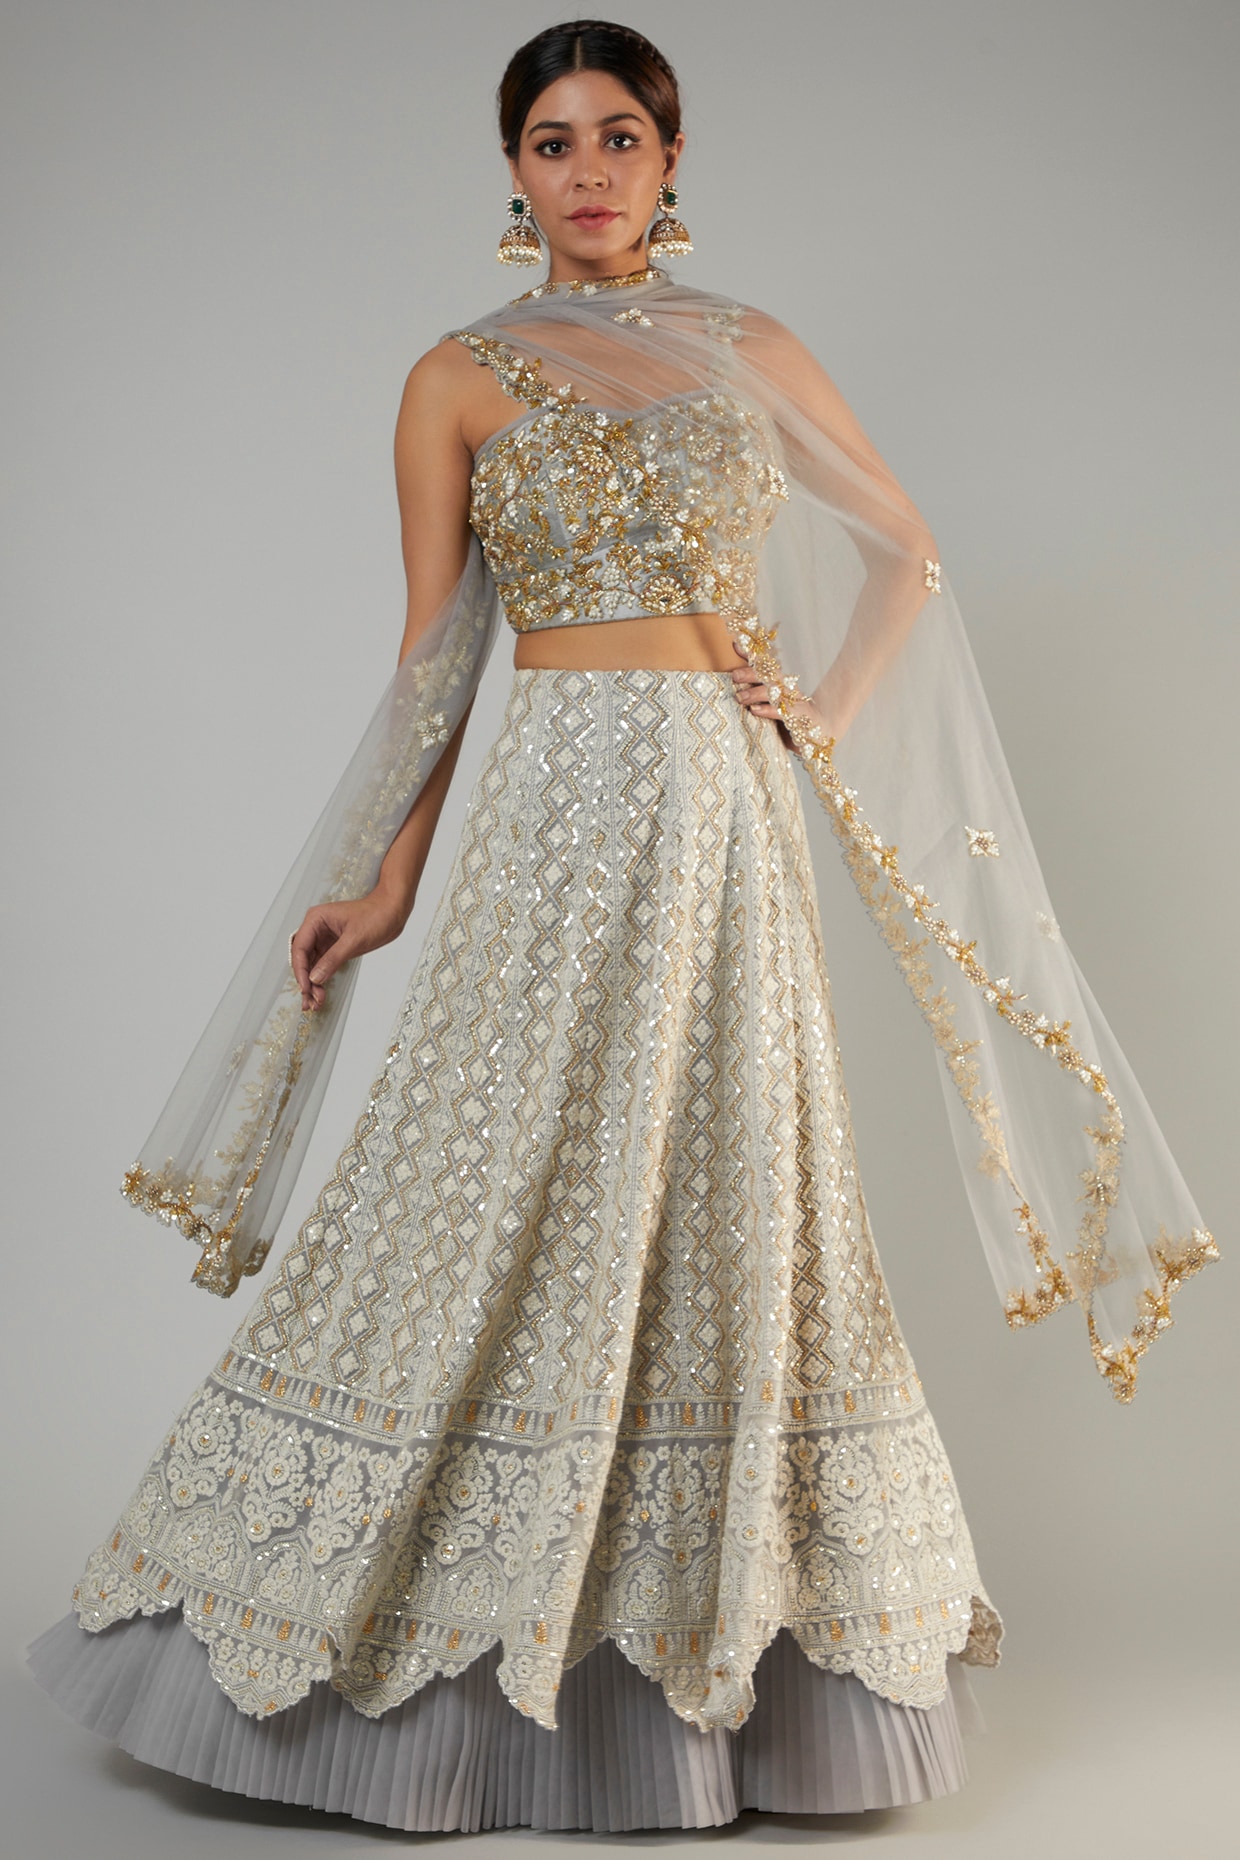 Net Lehenga Choli In Lucknow - Prices, Manufacturers & Suppliers